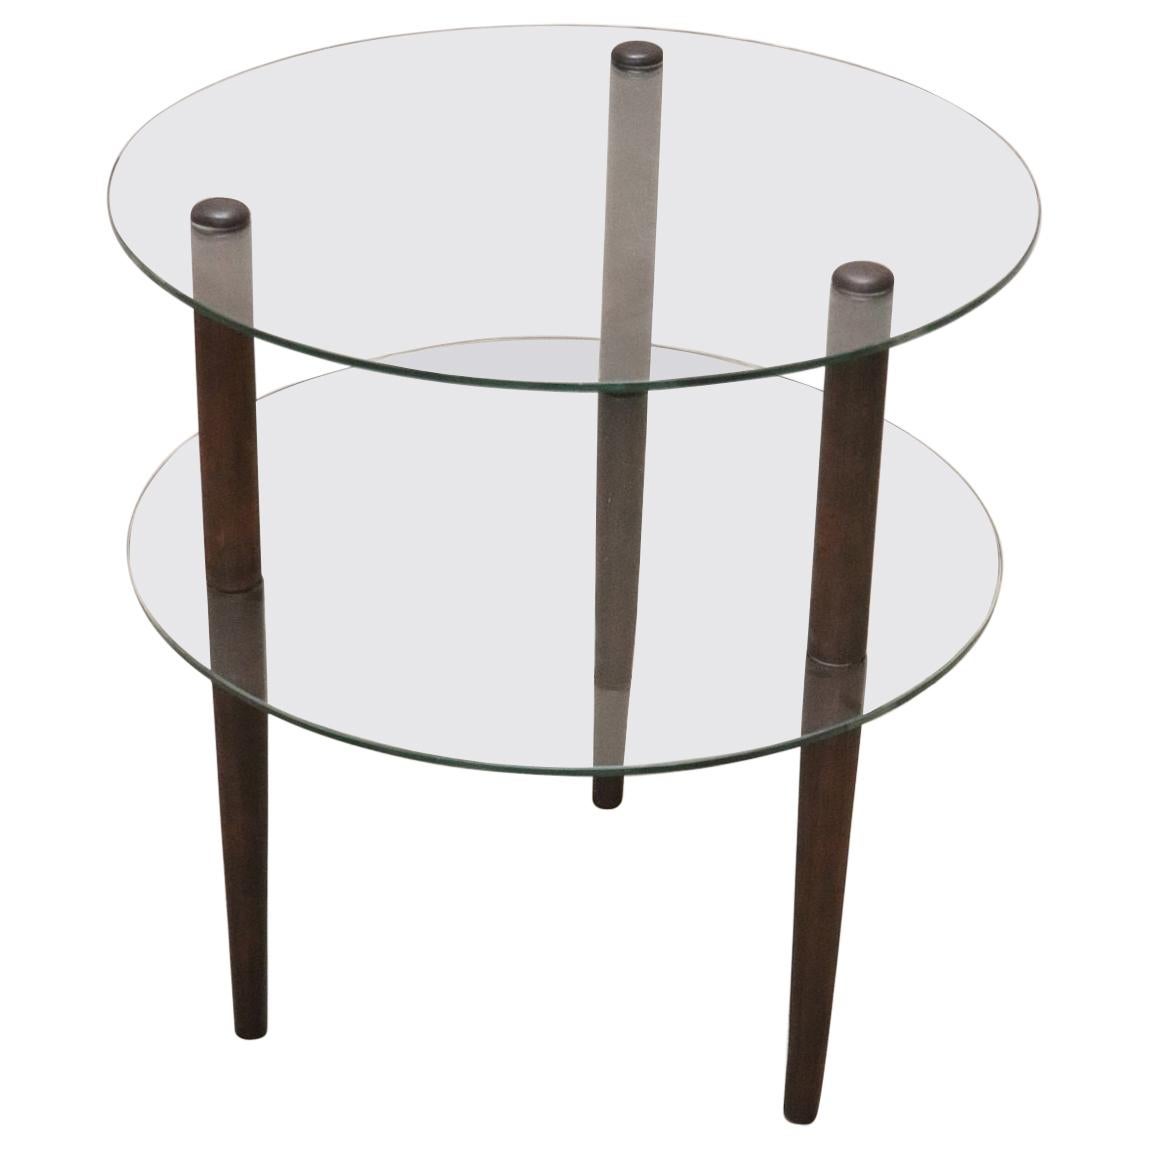 20th Century Italian Design Coffee Table or Side Table by Enrico Paulucci, 1960s